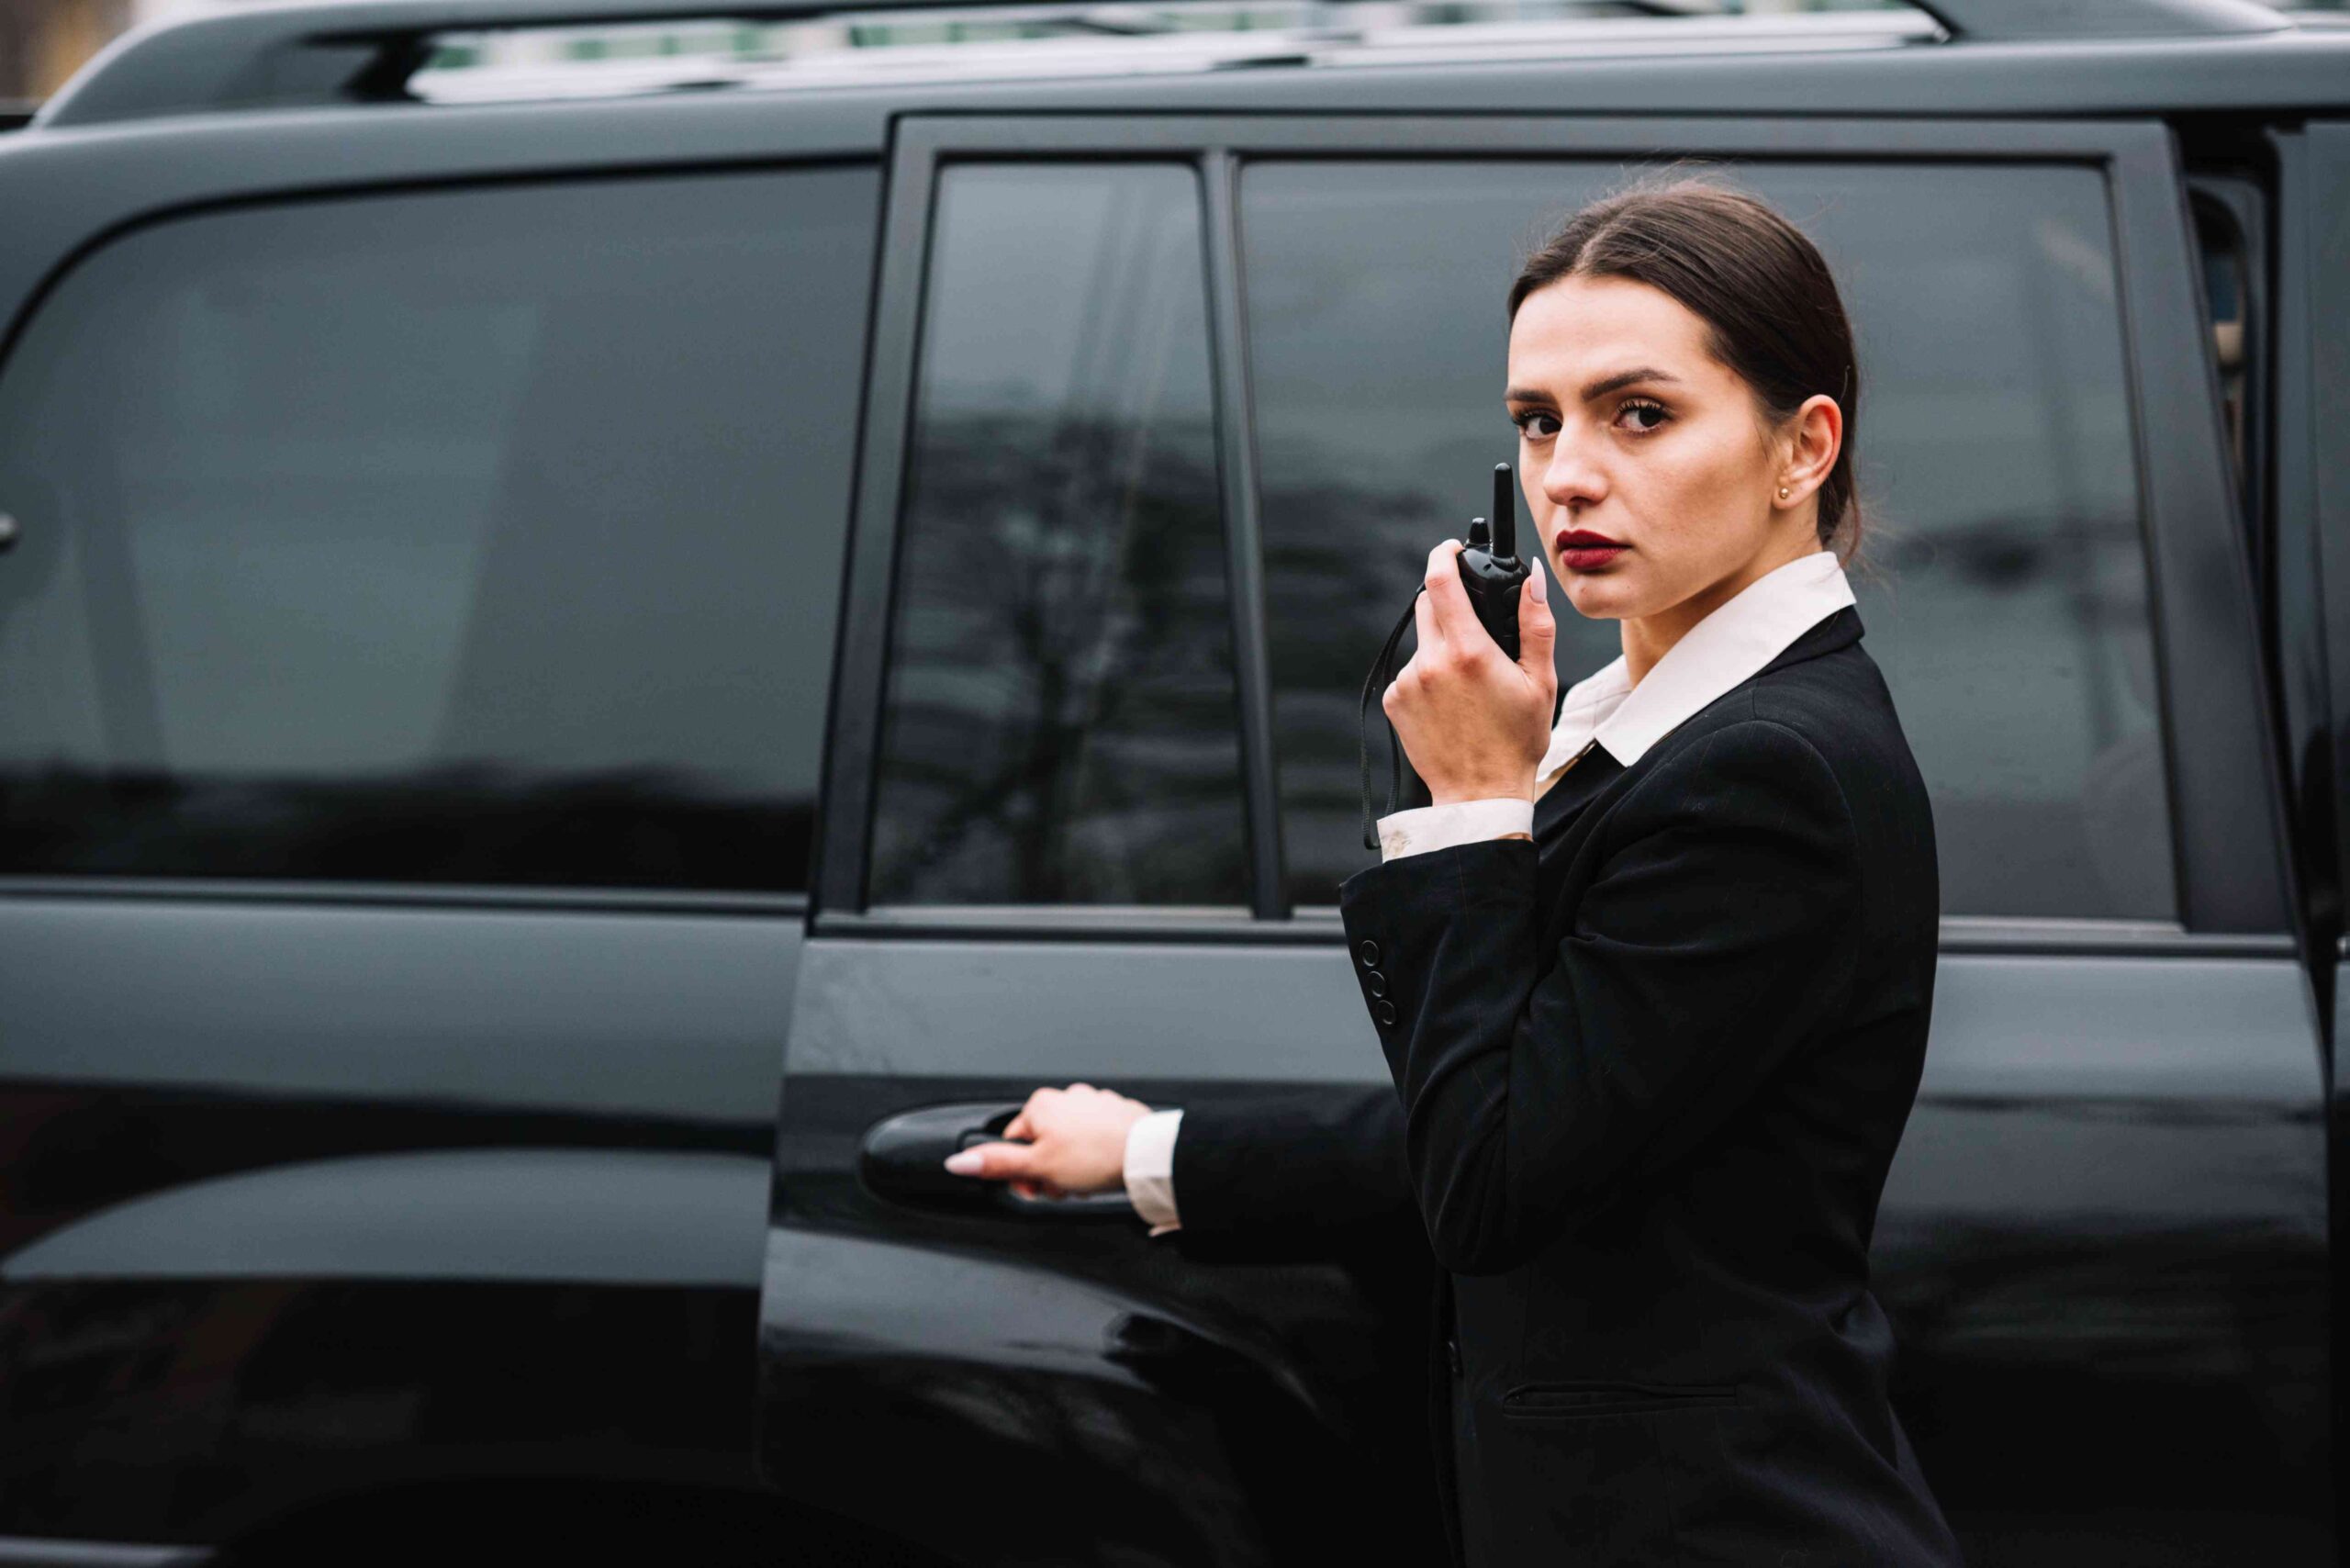 Corporate Event Security: Responsibilities and Best Practices for Security Guards